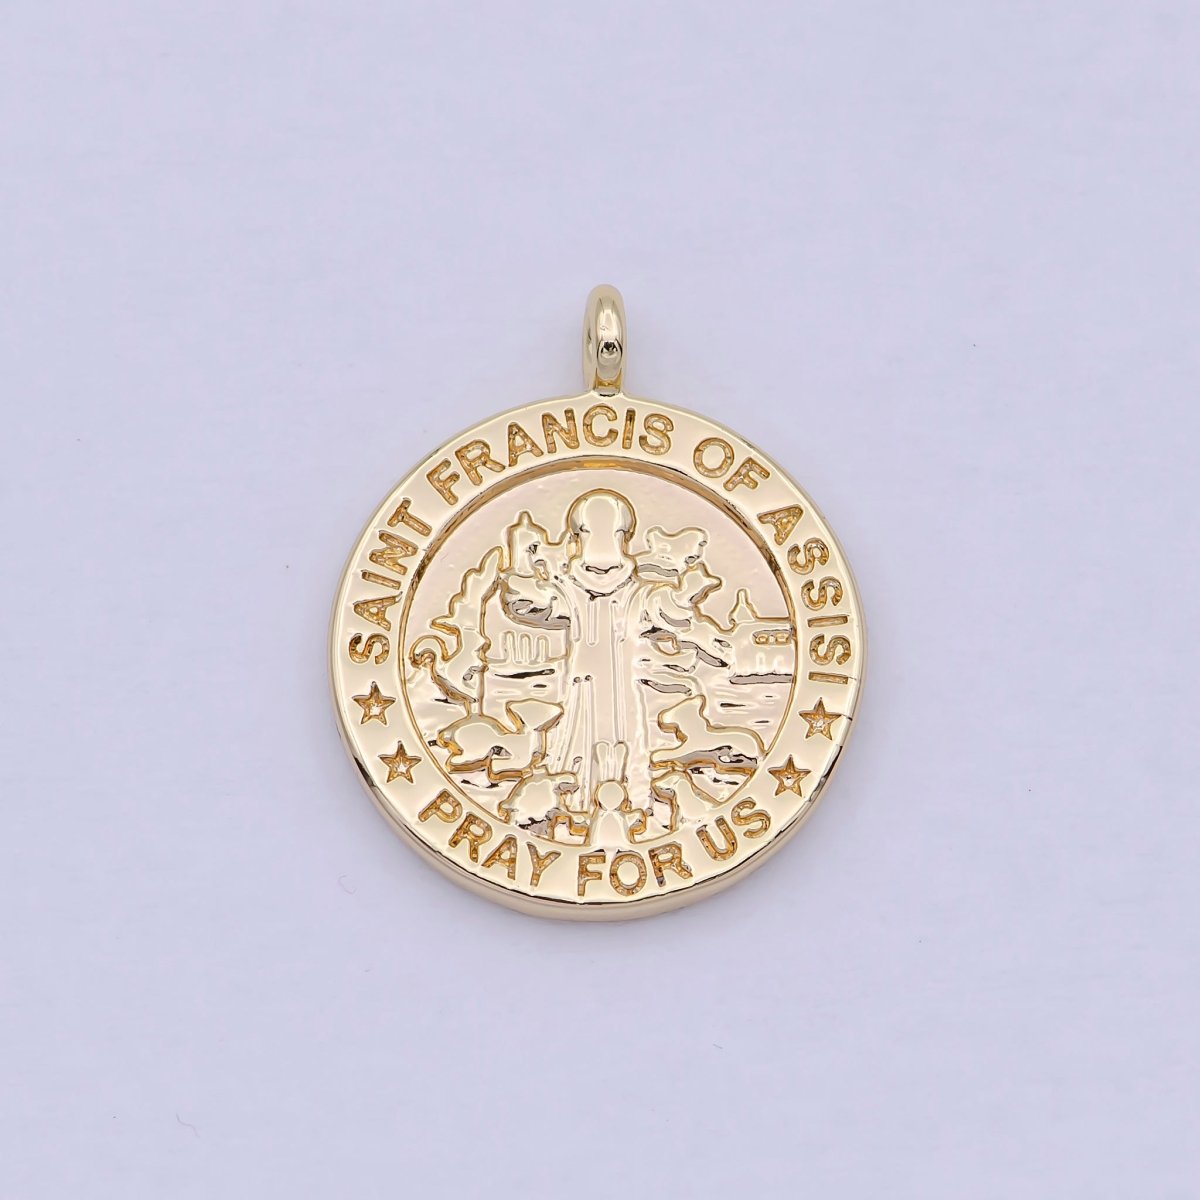 OS 18k Gold Filled Saint Francis of Assisi Patron Saint Of Pets / Protect My Pet Pewter Color Dog Tag Charm W-186 - DLUXCA